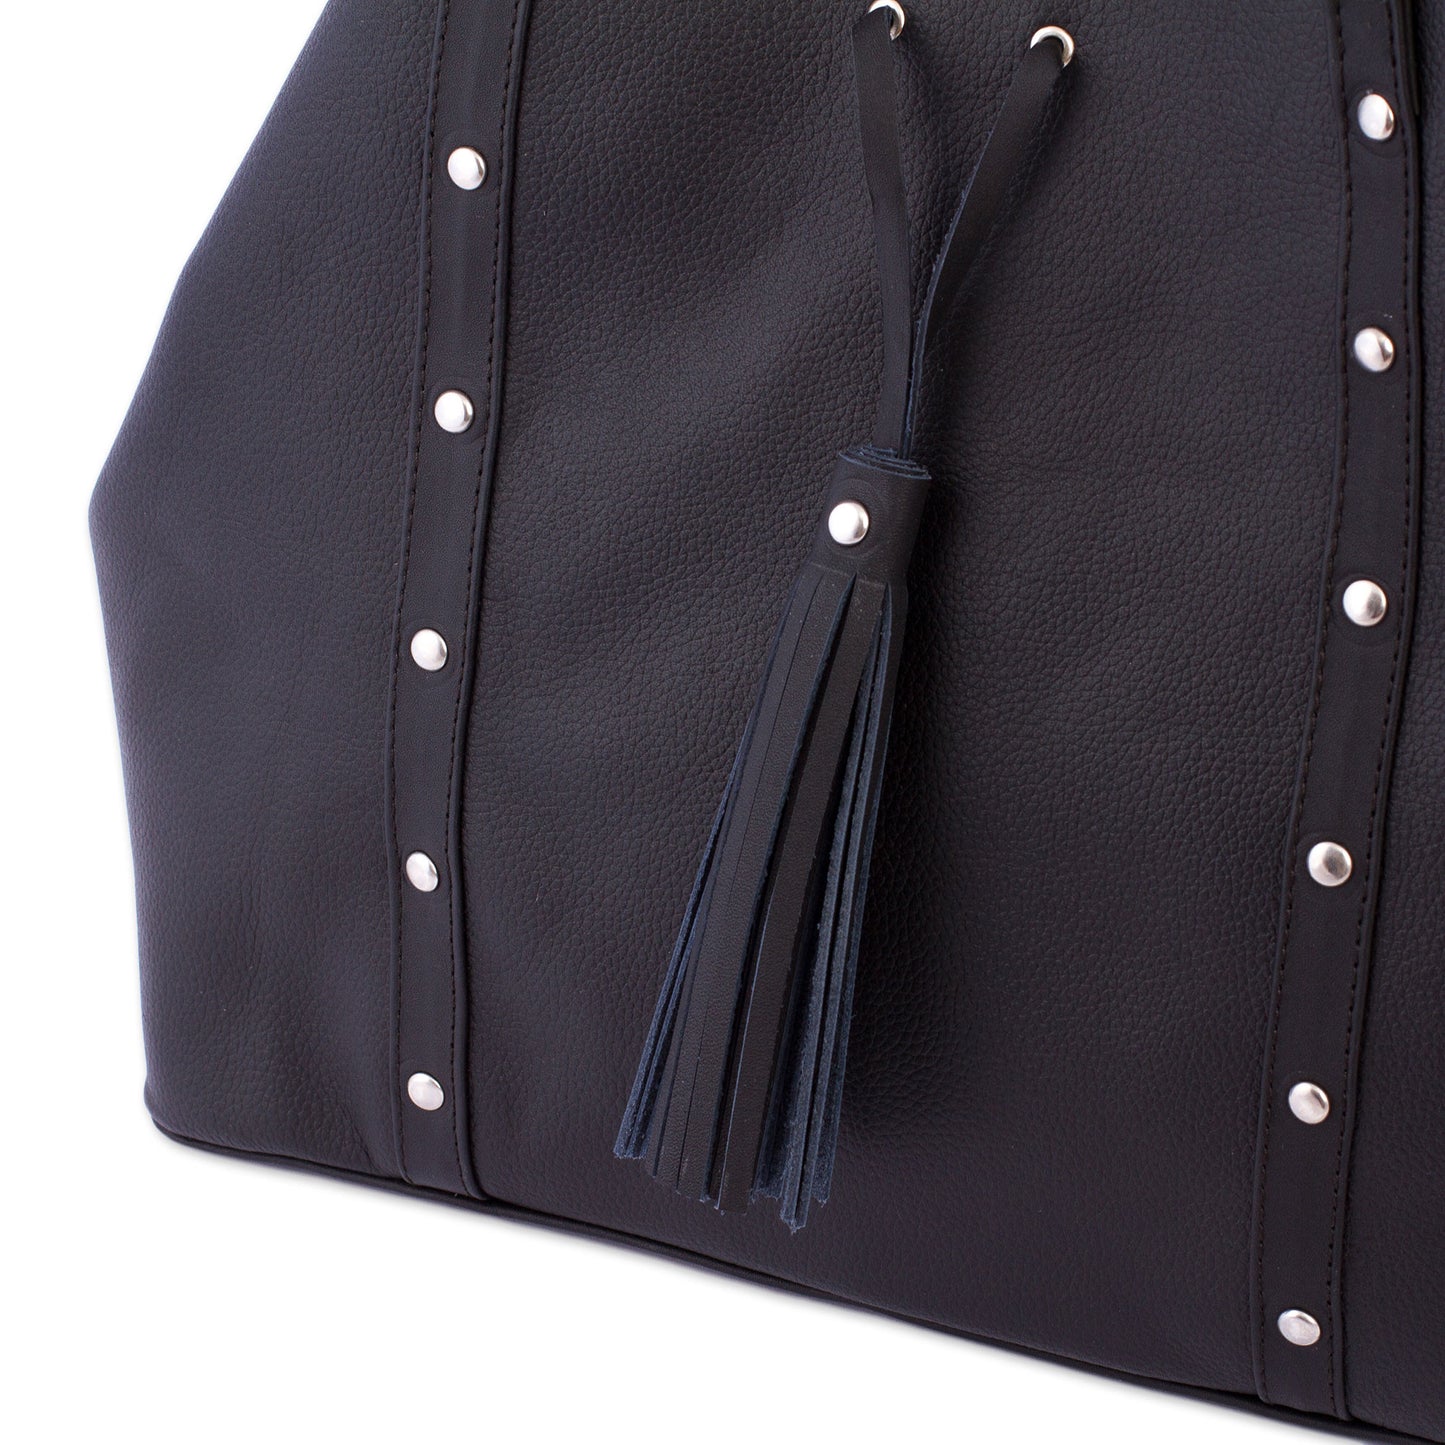 'Confidence' Black Leather Shoulder Bag with Red Striped Lining